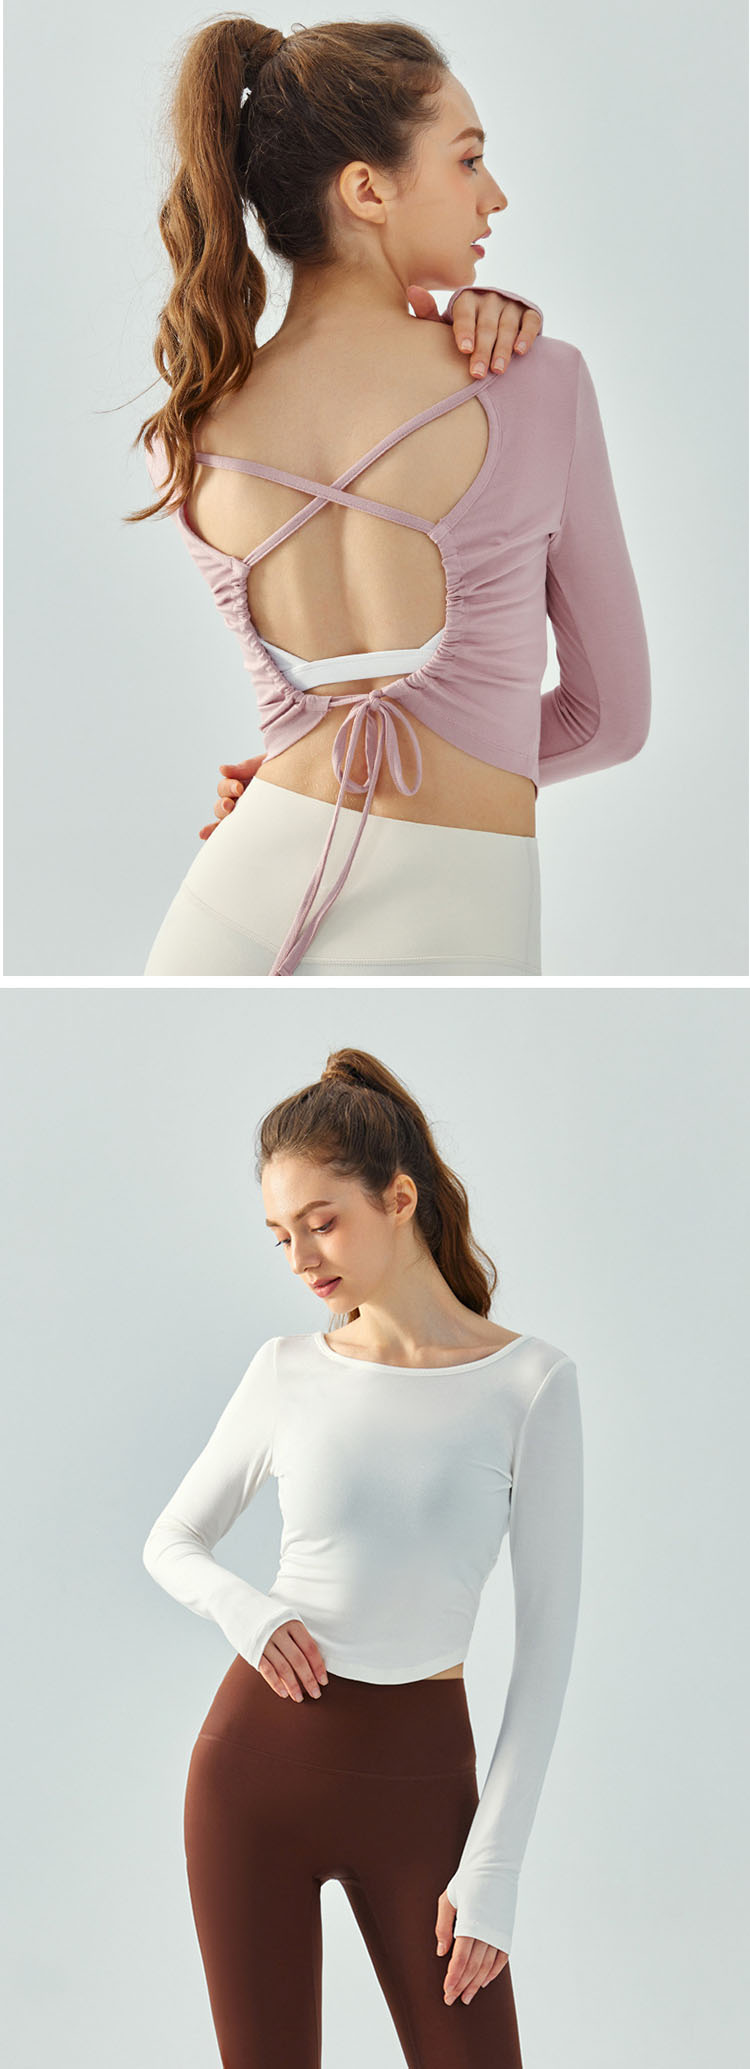 Our top also features an asymmetrical shoulder design that showcases the creativity